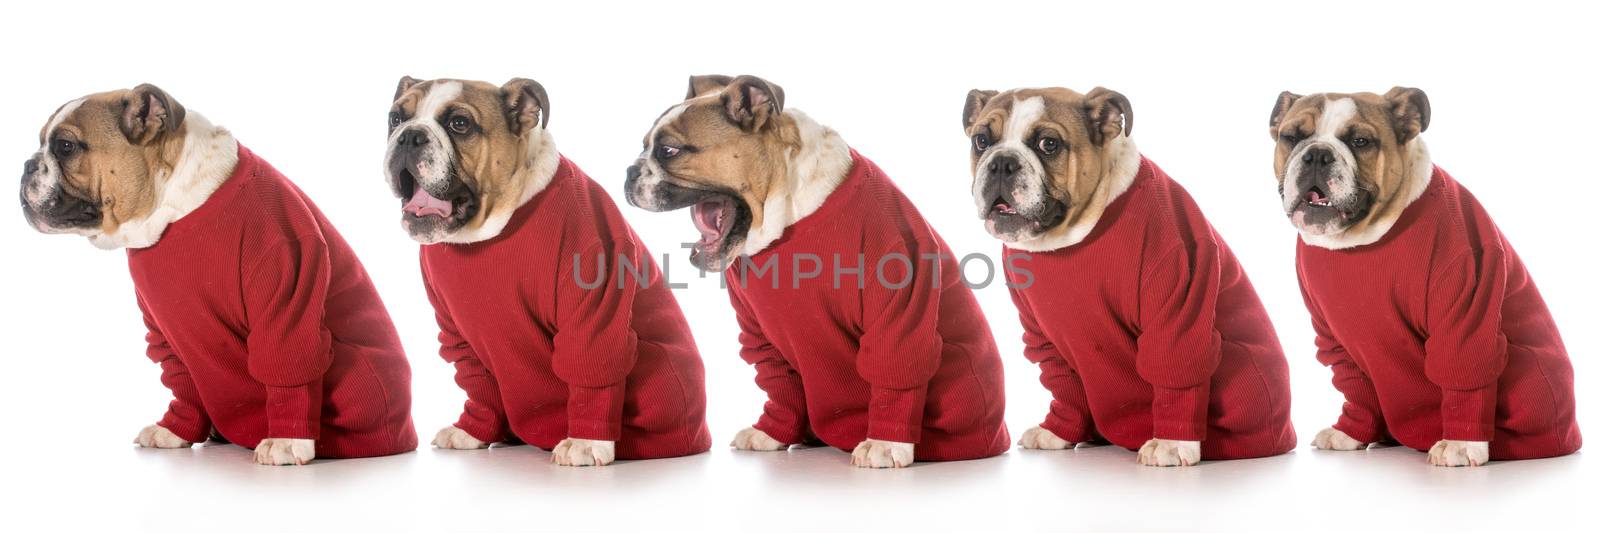 english bulldog wearing red sweater yawning in sequence on white background